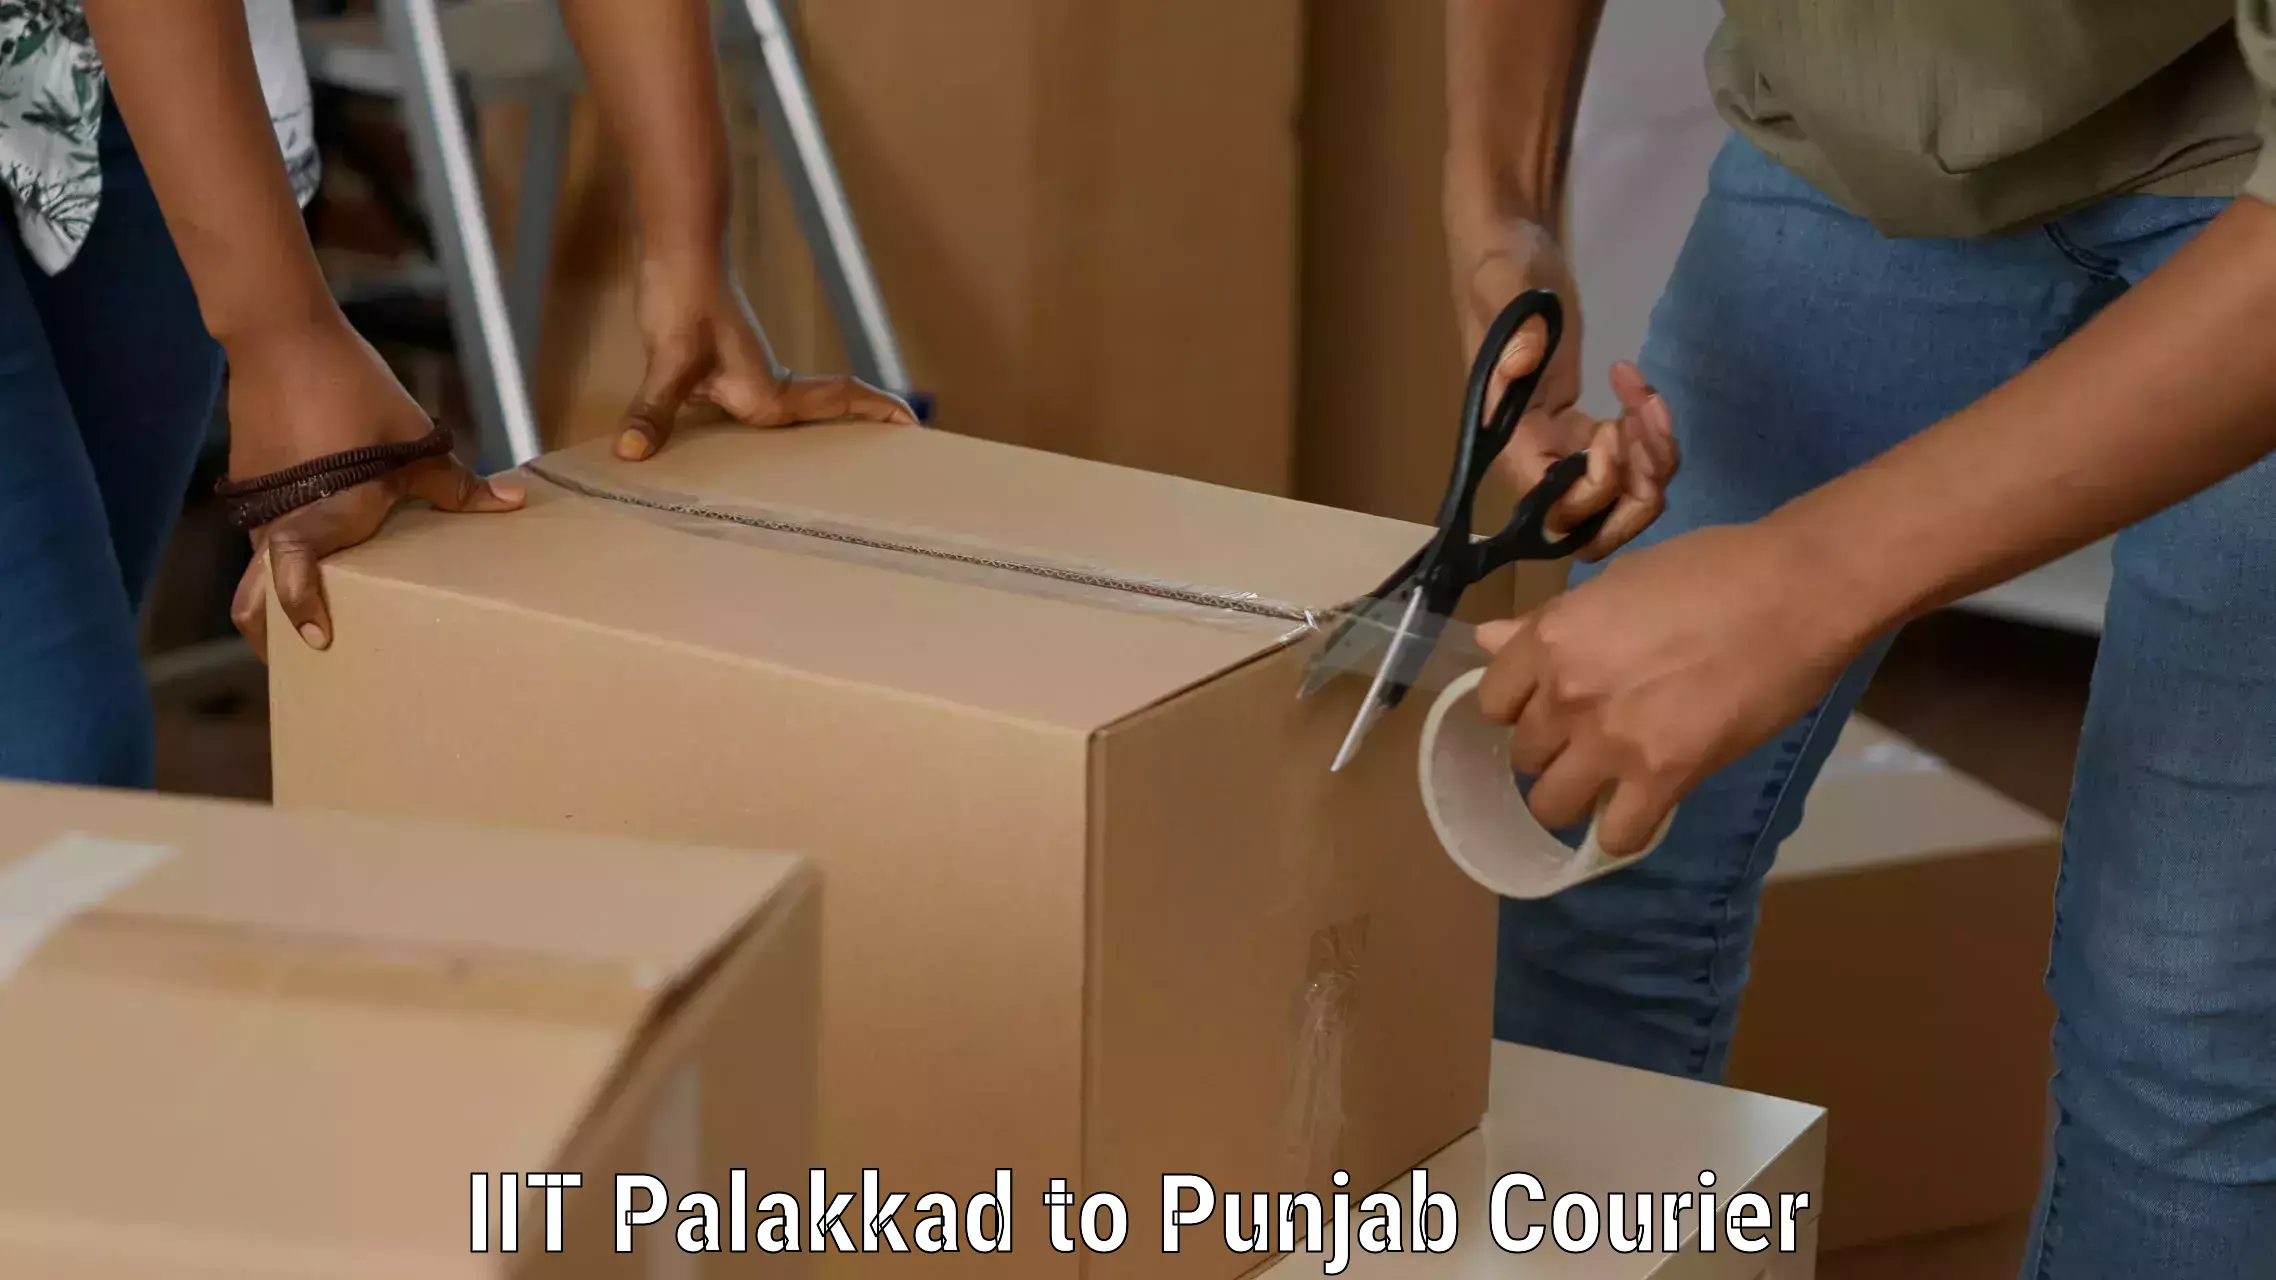 On-call courier service IIT Palakkad to Punjab